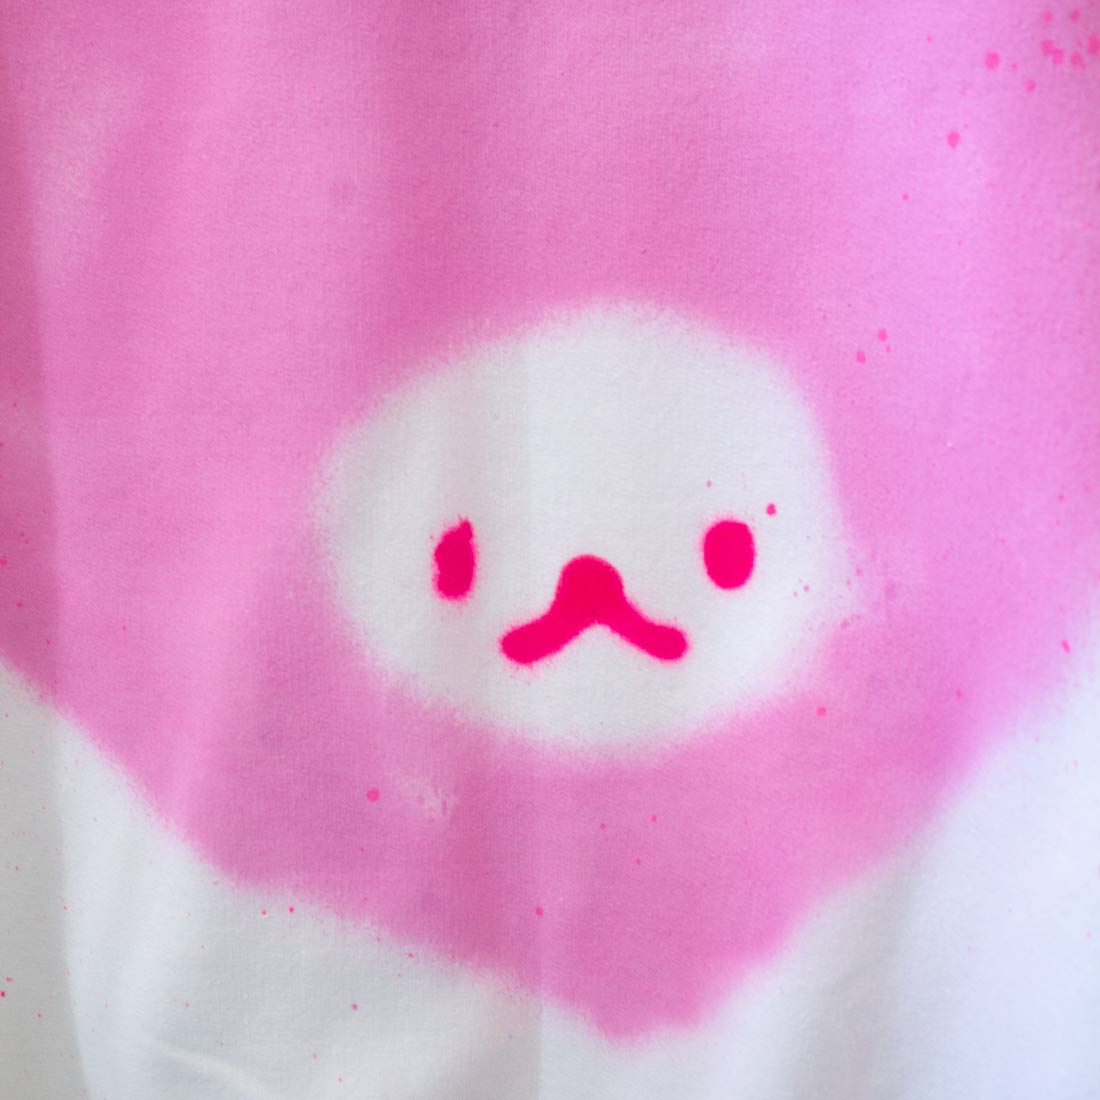 Spray Painted Heart with Kitty Face Crewneck